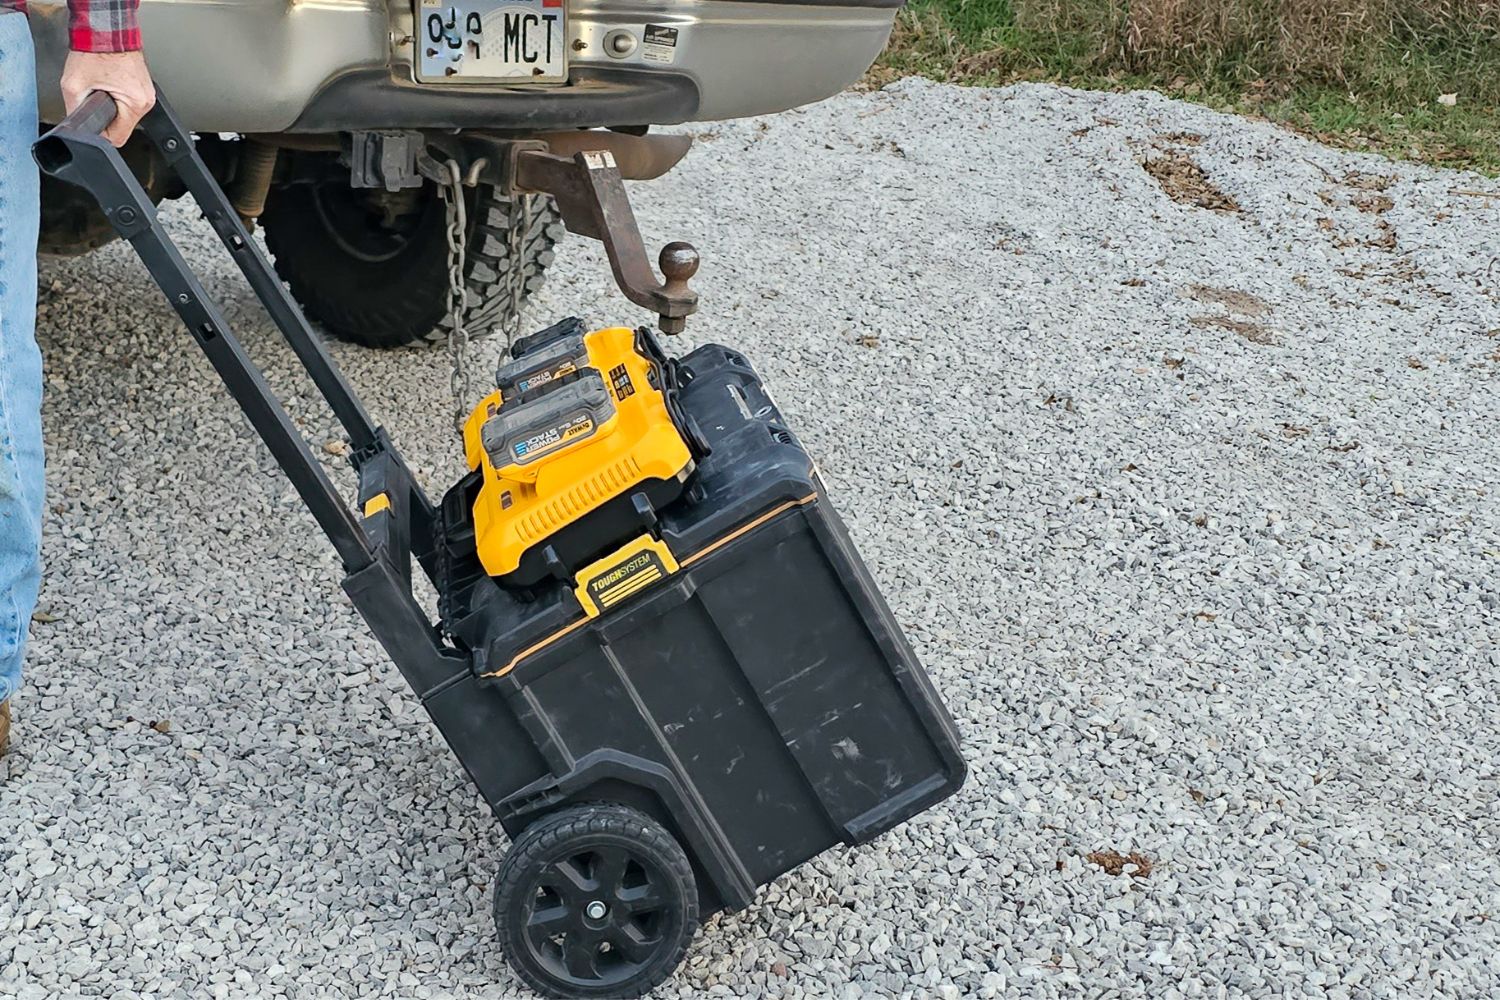 The Dewalt Charging Station on top of a rolling tool box while being wheeled to a jobsite.